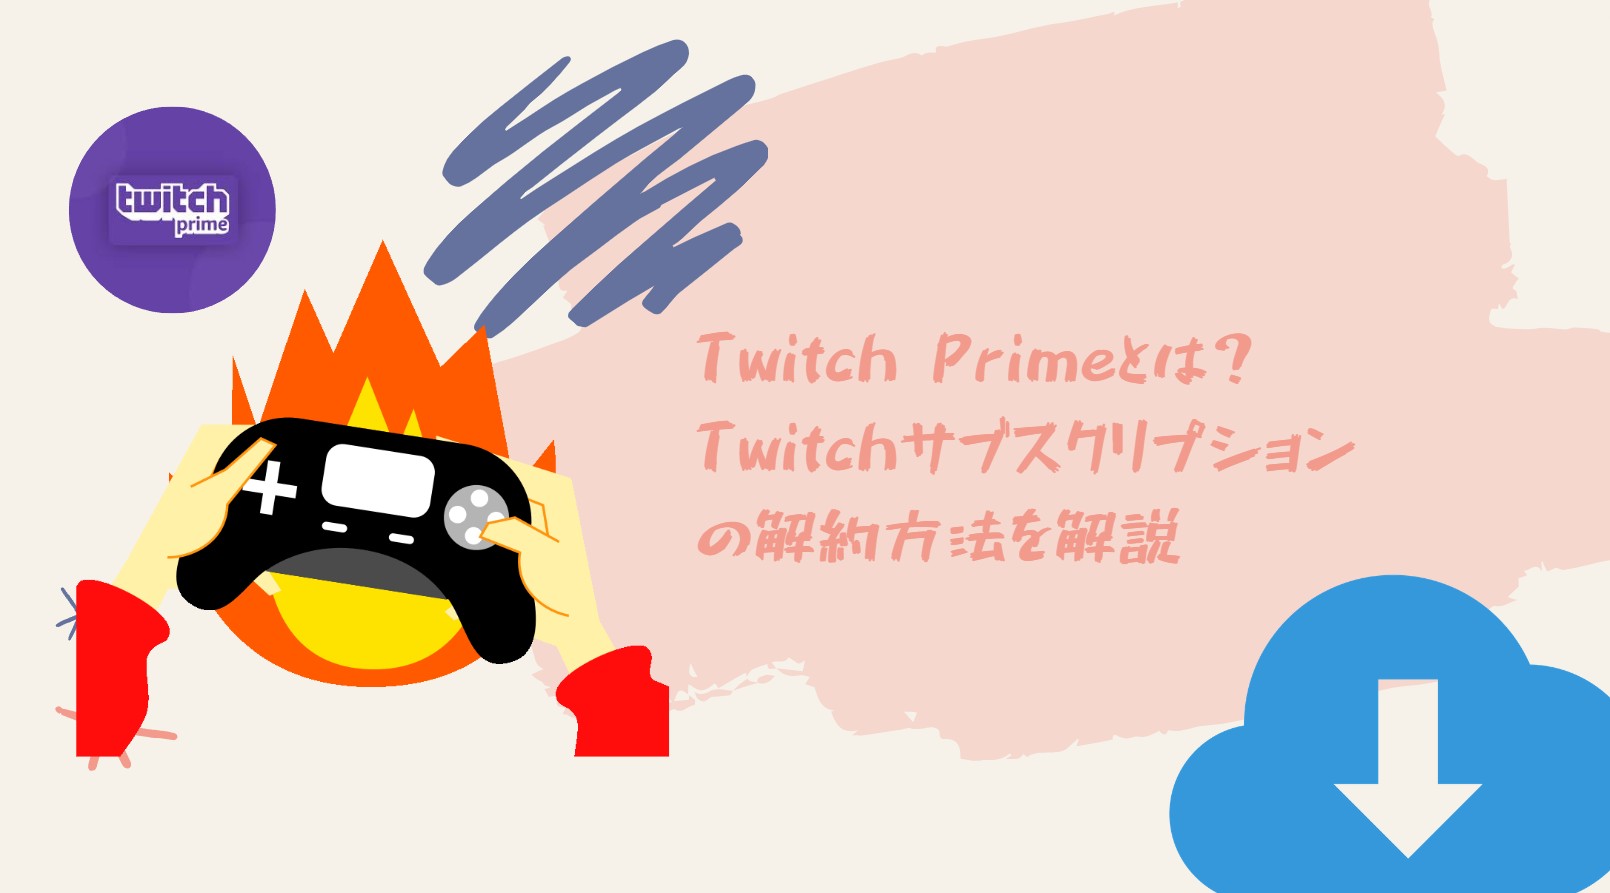 Twitch Primeとは？Twitchサブスクリプションの解約方法を解説